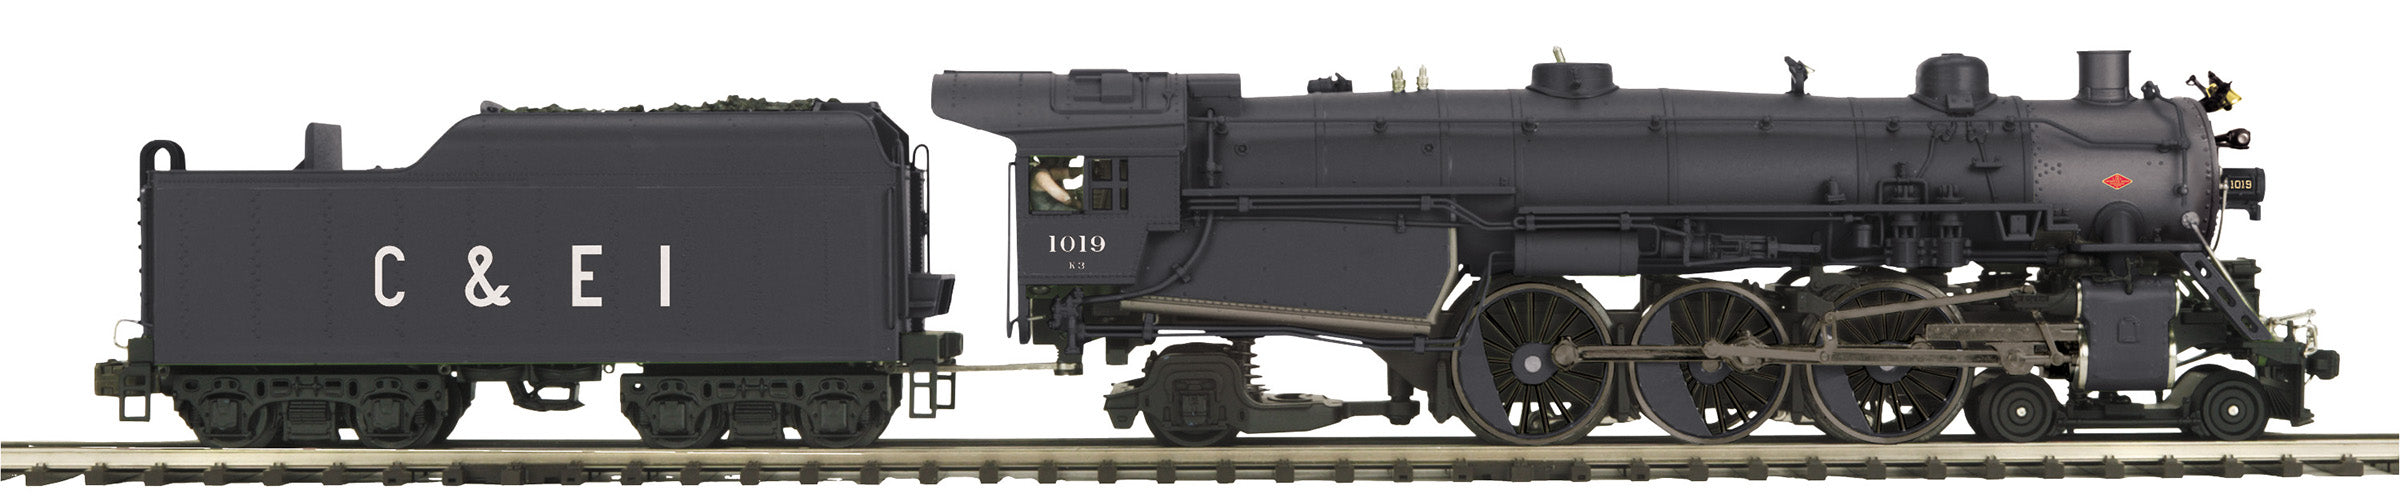 MTH 20-3935-1 - 4-6-2 P47 Baldwin Pacific Steam Engine "Chicago & Eastern Illinois" #1019 w/ PS3